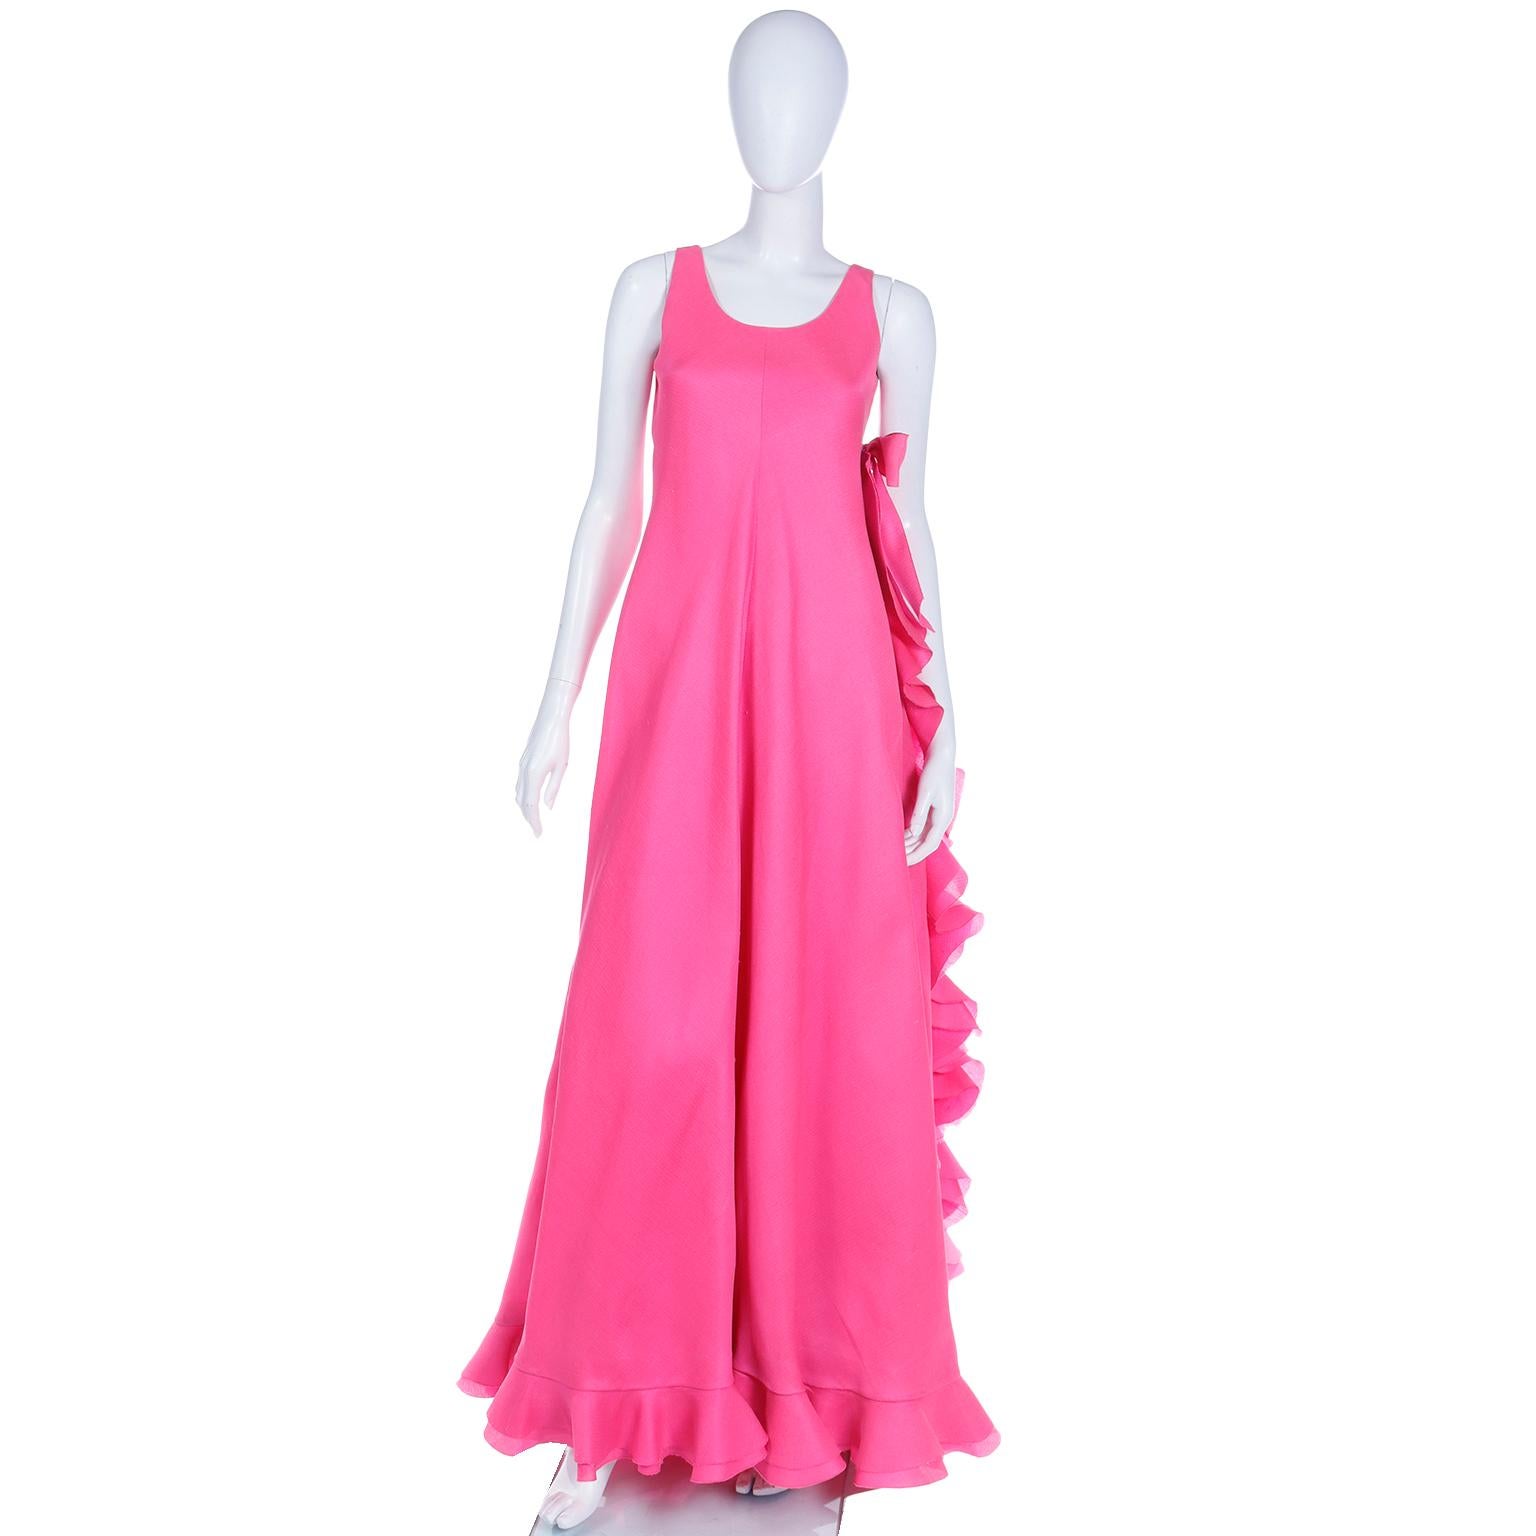 1971 Christian Dior Haute Couture Pink Ruffled Runway Evening Dress Grace Kelly  For Sale 4